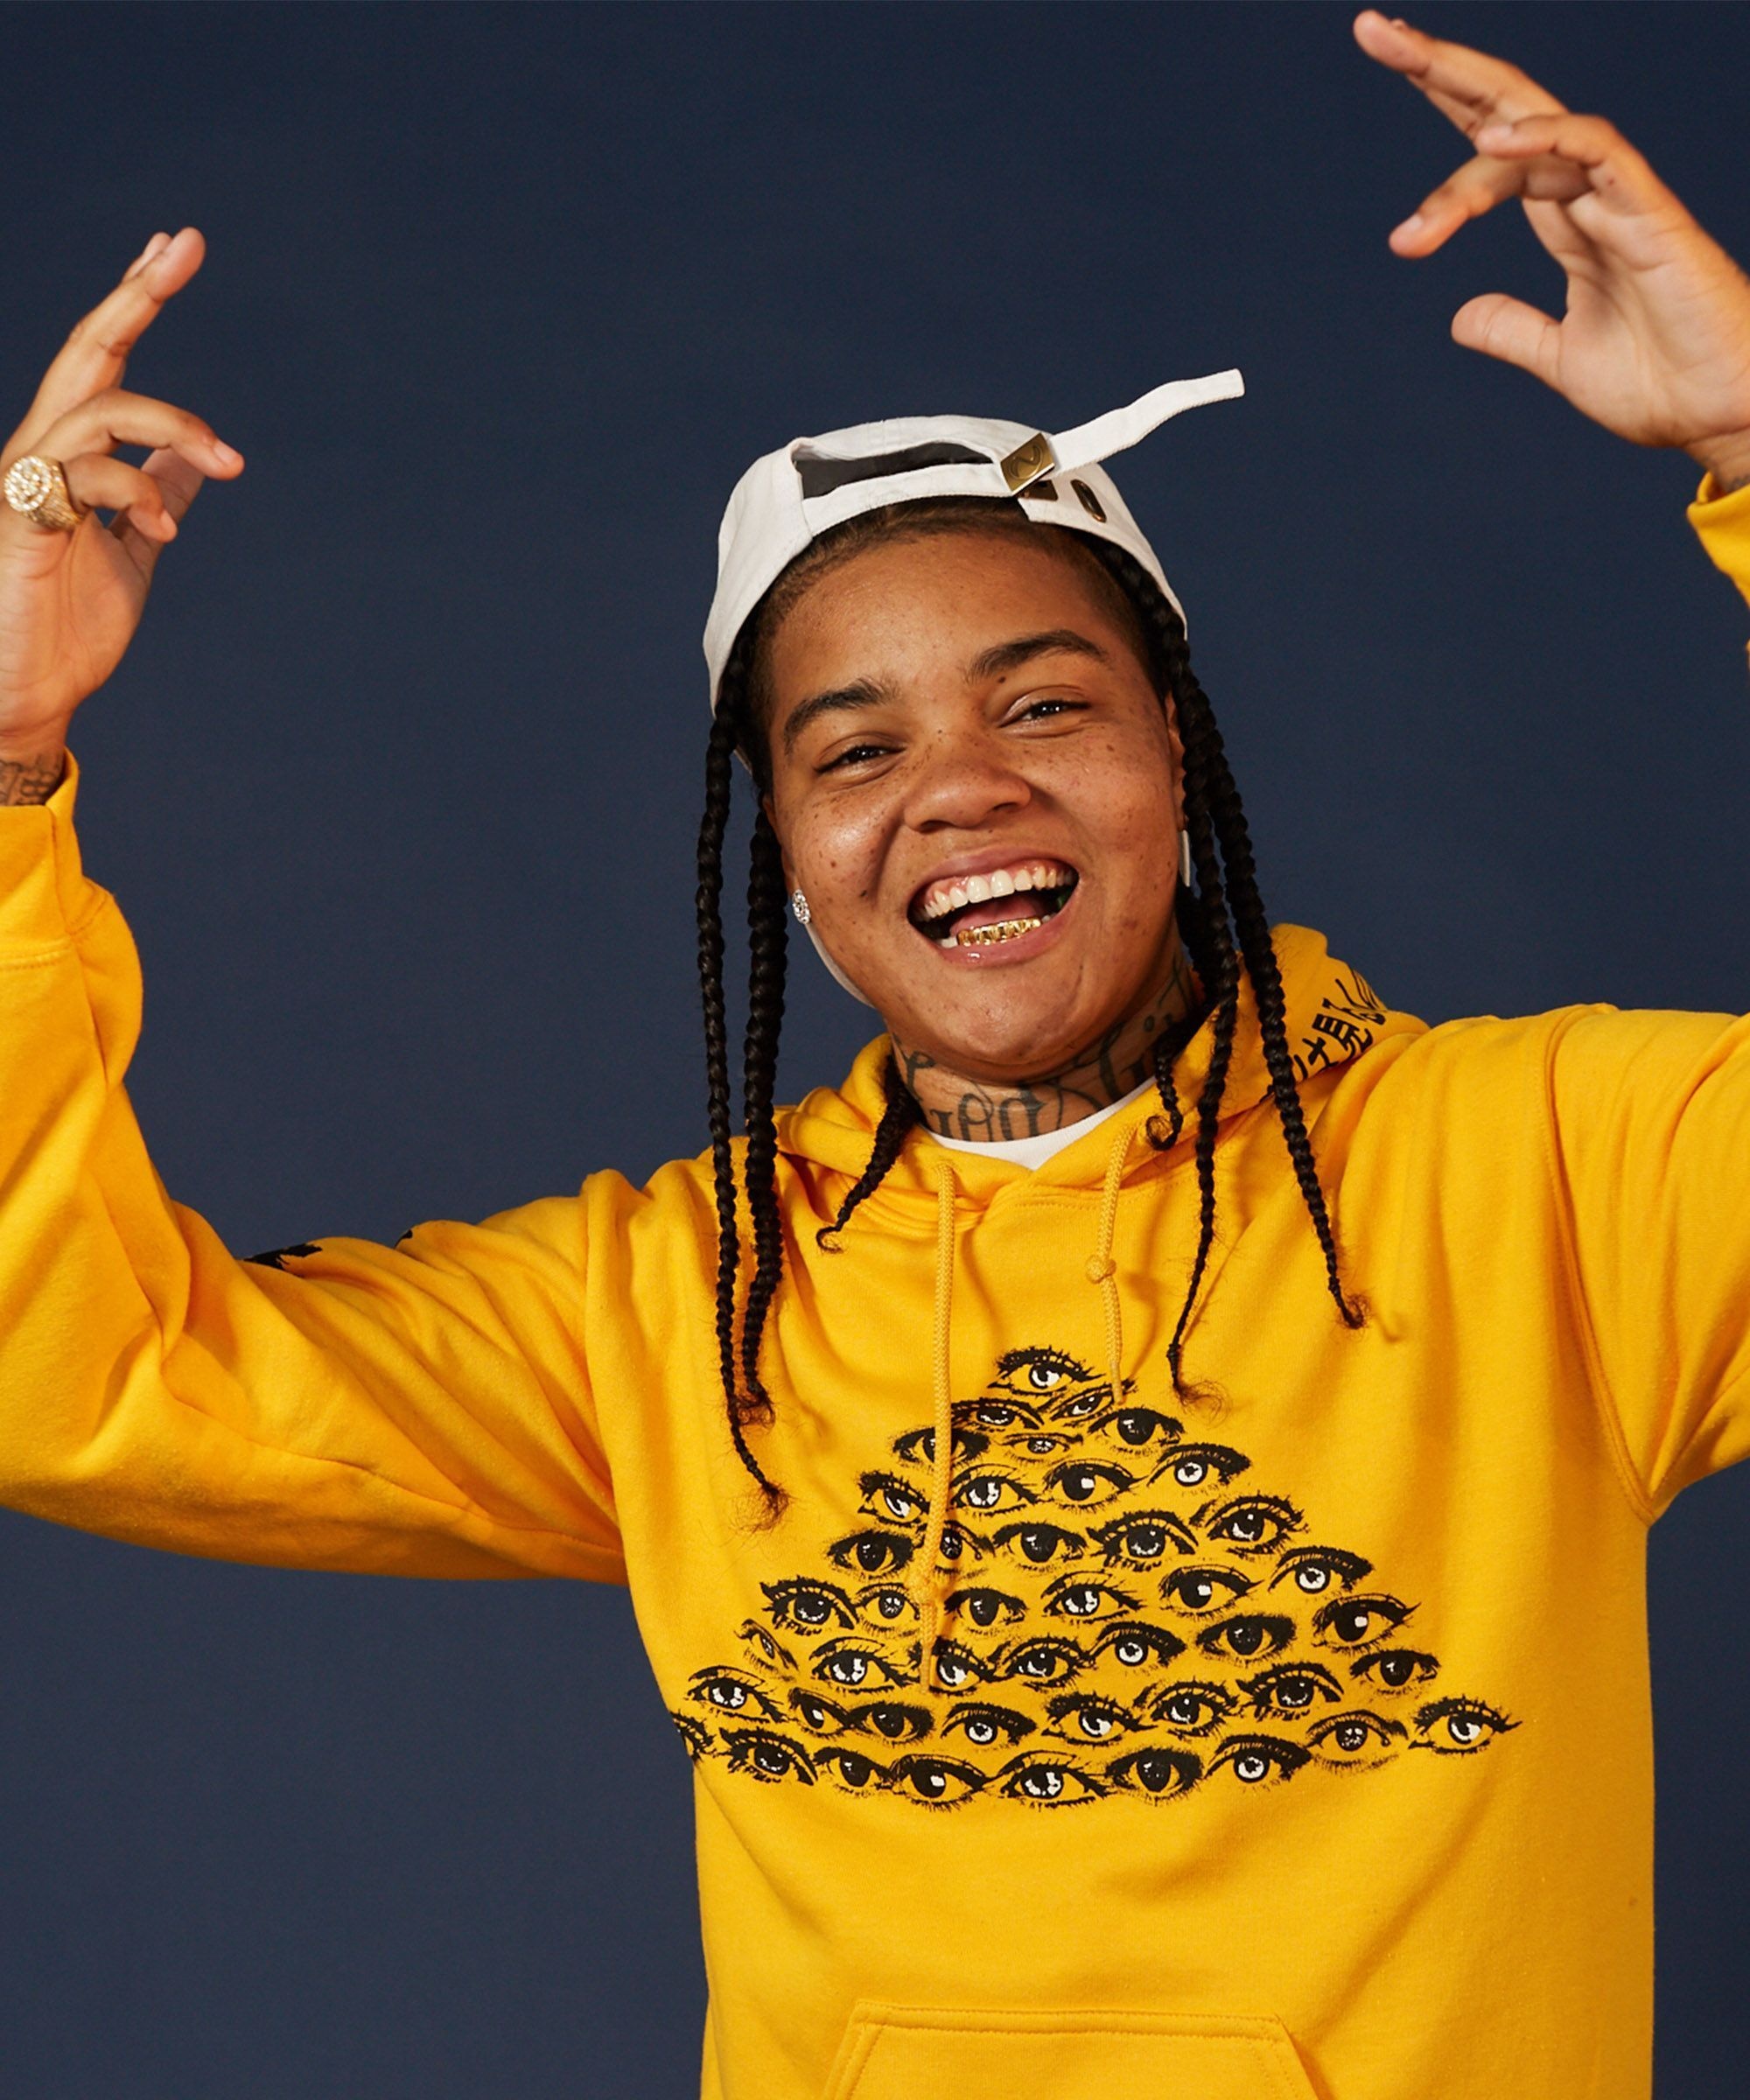 Young M.A: First gained widespread recognition with the release of the hit single "Ooouuu". 2000x2400 HD Background.